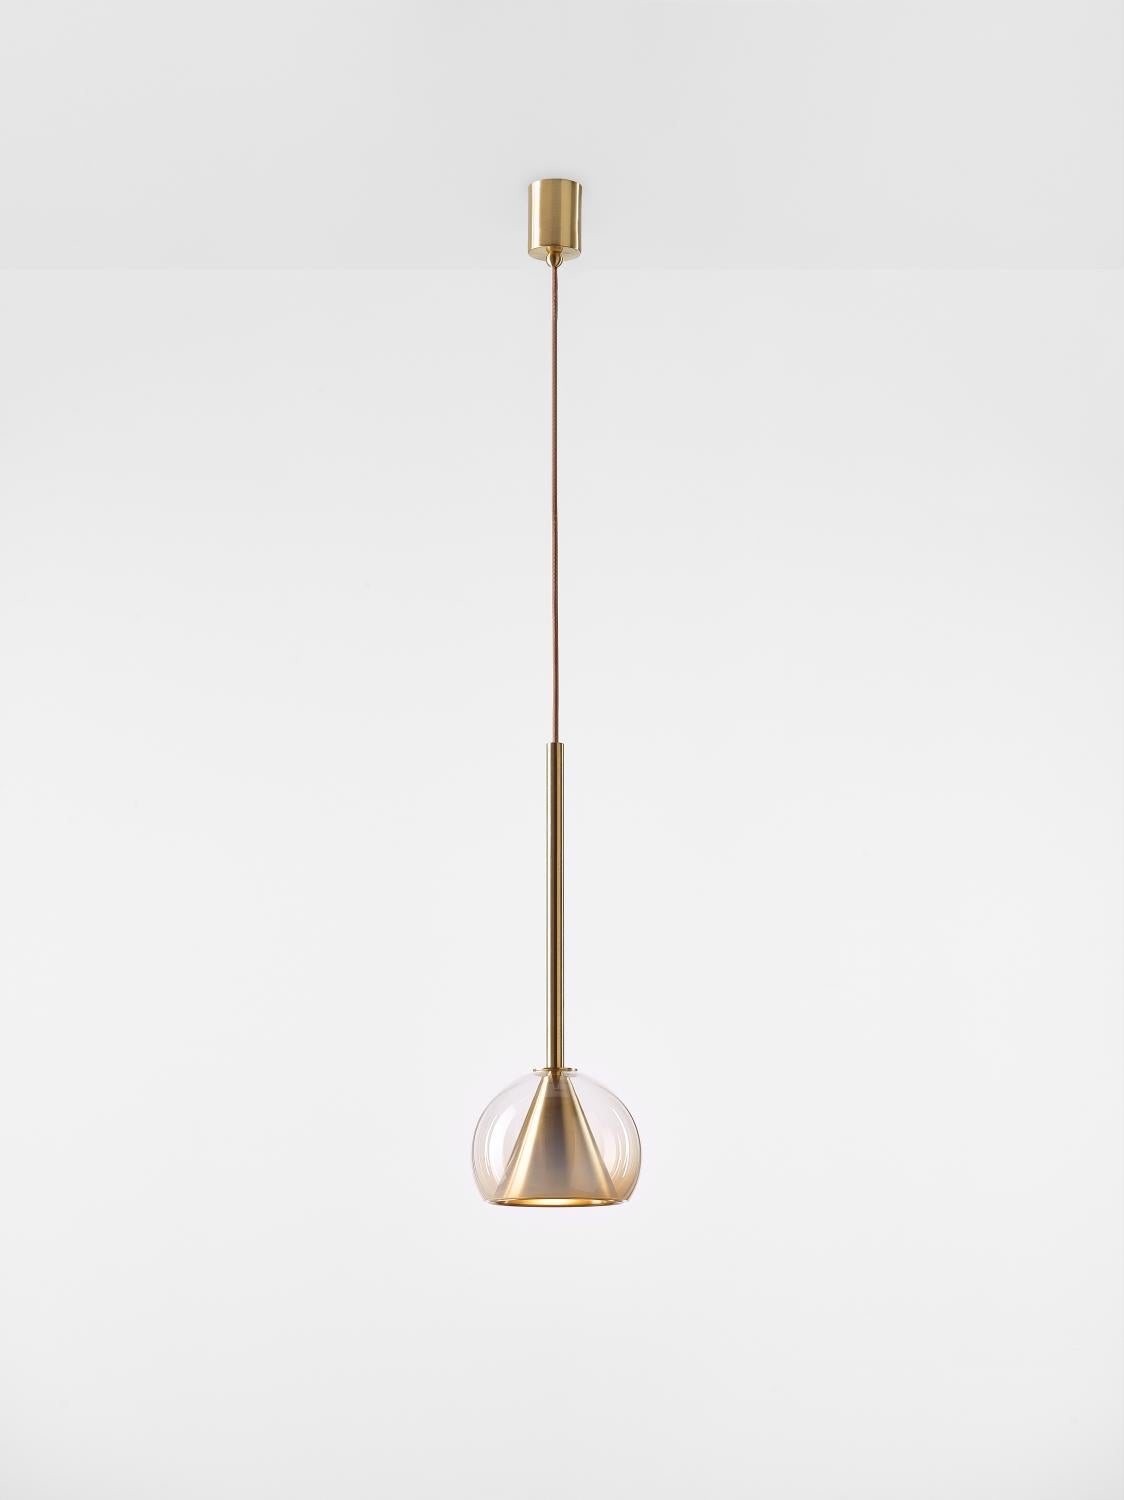 Set of 2 small neutral nude kono pendant lights by Dechem Studio.
Dimensions: D 19 x H 52 cm.
Materials: brass, glass.
Also available: different finishes and colours available.

This collection of suspended light fixtures combines the